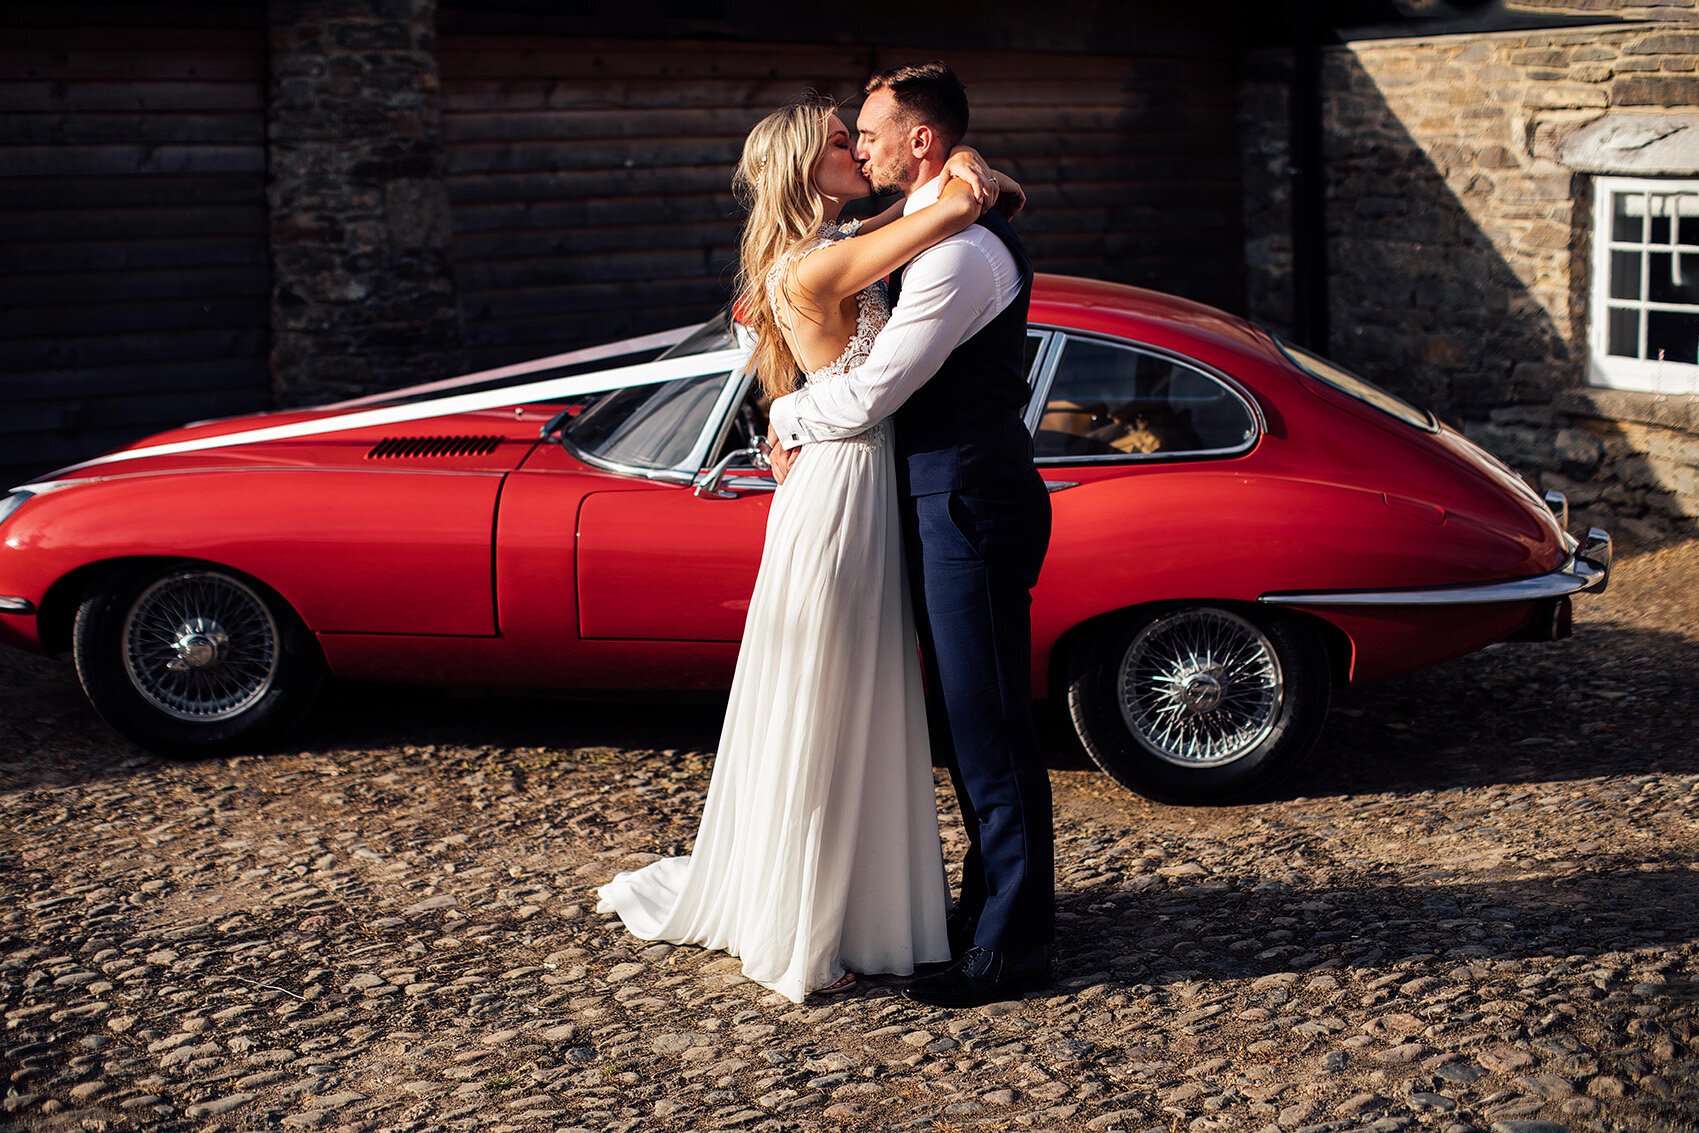 Bride and groom embracing in front of a red sports car